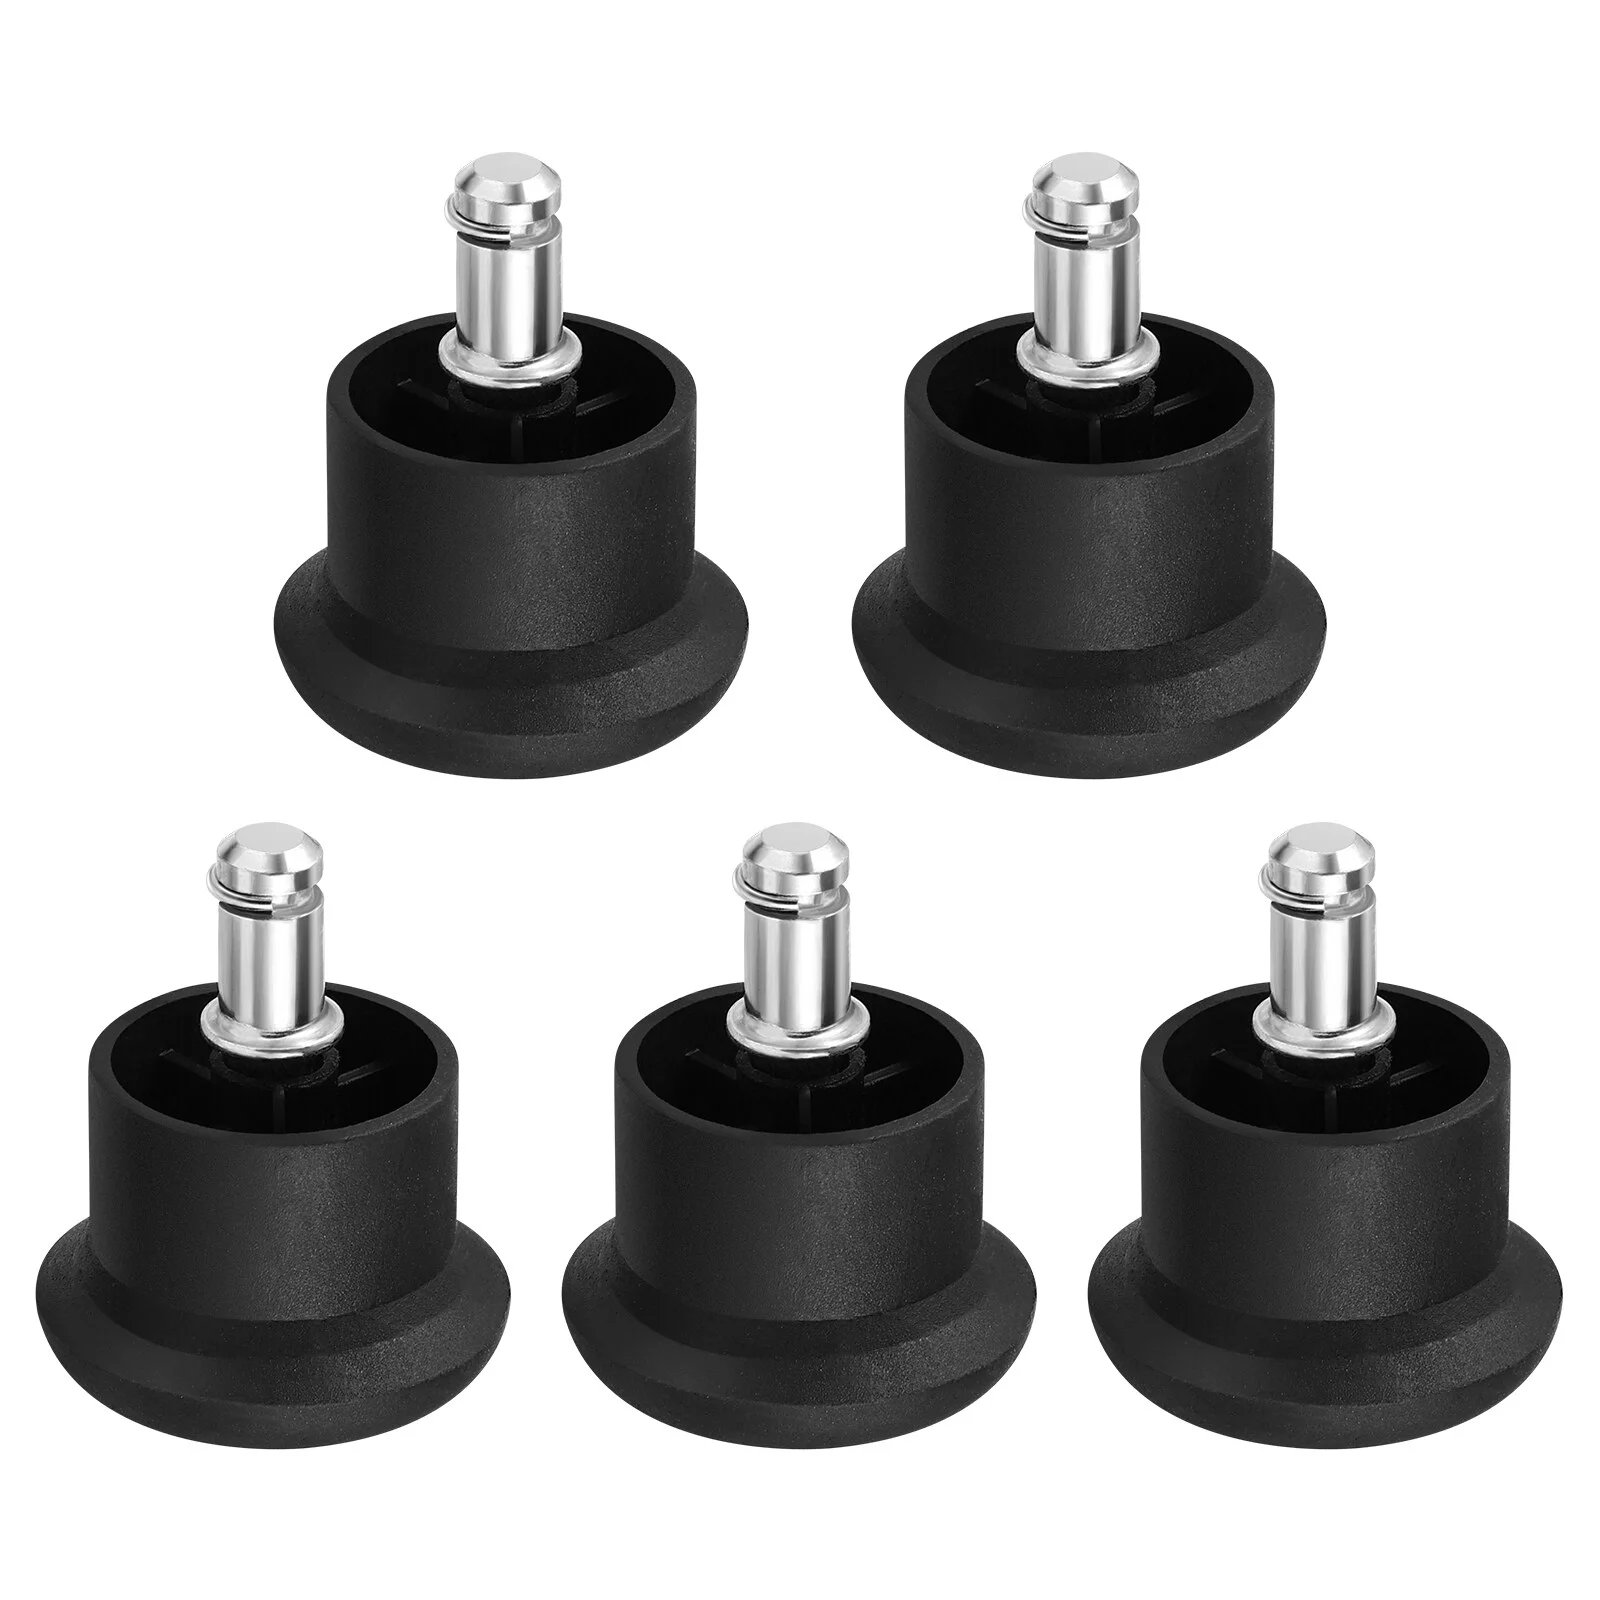 

VOSAREA 5pcs Swivel Accent Chair Heavy Duty & Safe Chair Wheels Stopper Fixed Stationary Castors Office Chair Foot Glides